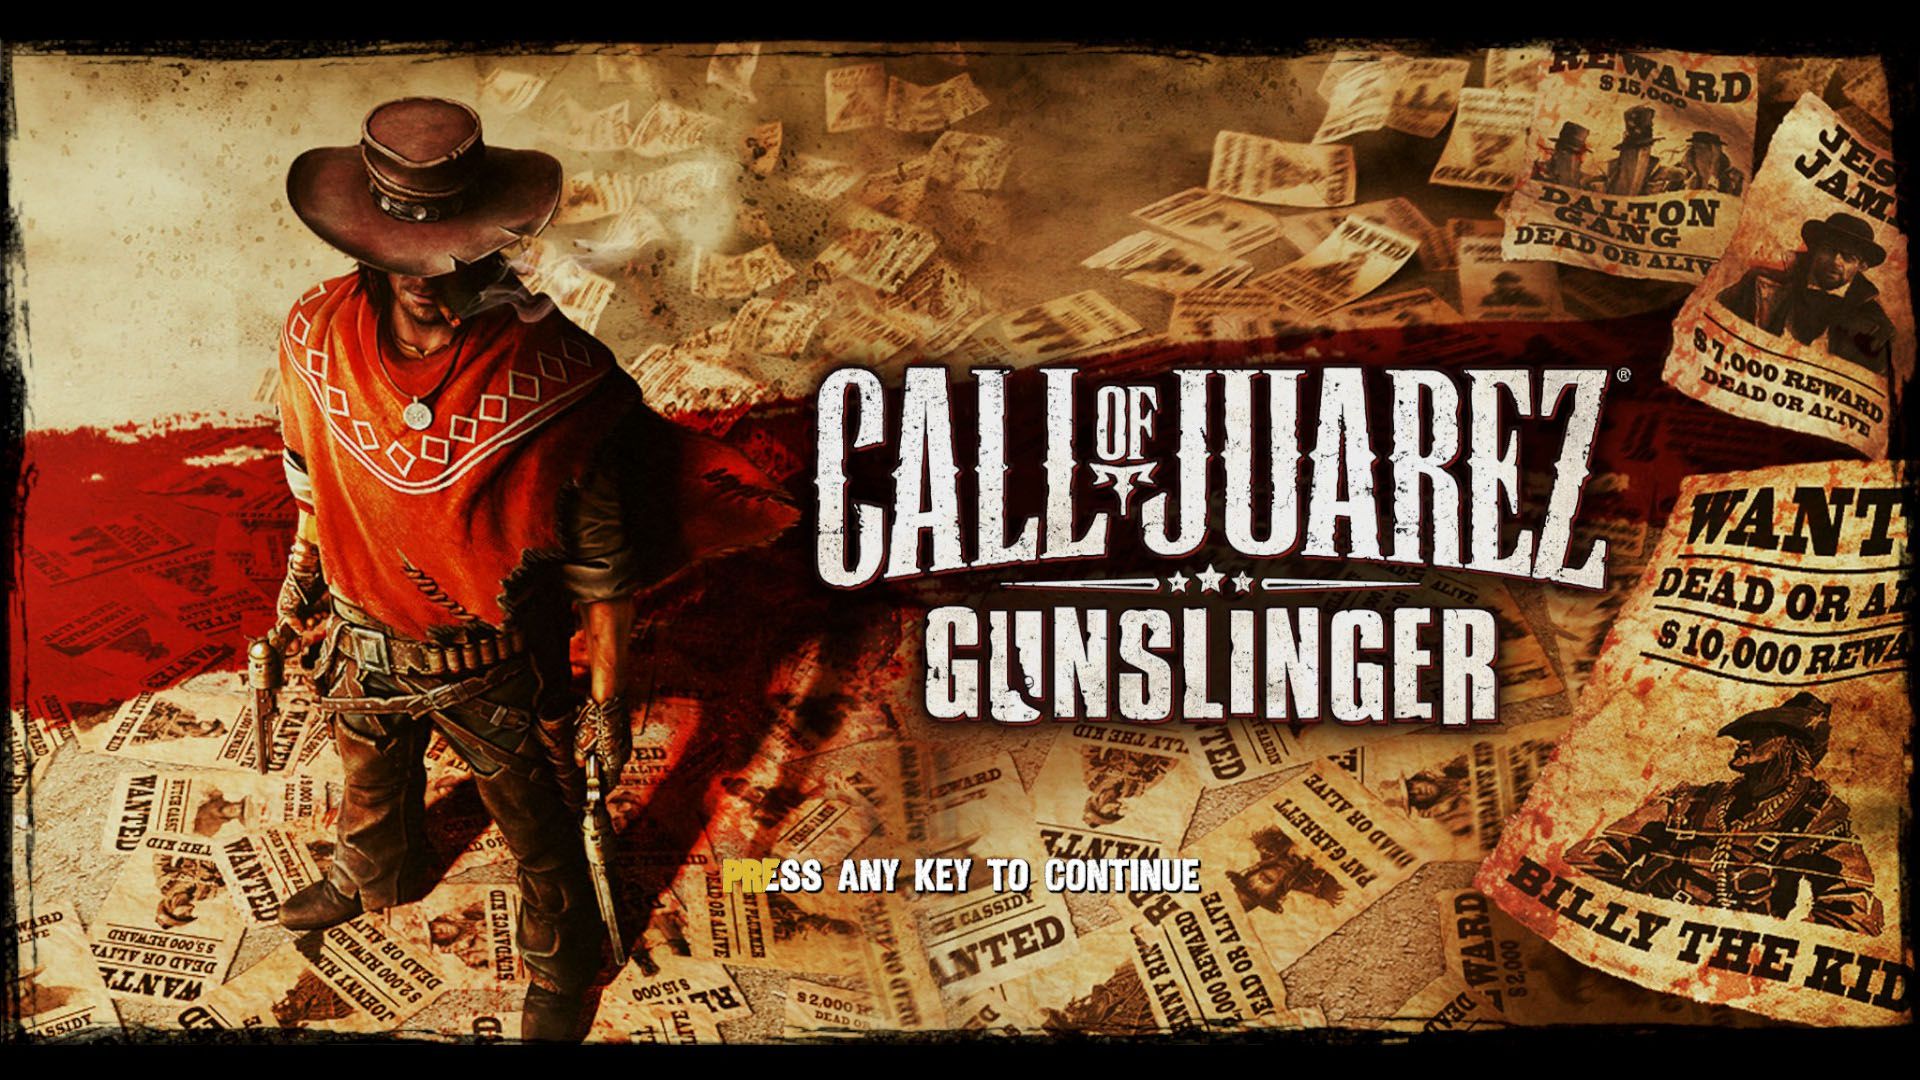 Call of Juarez Wallpaper. Xbox Wallpaper Call of D, Secret Diary of a Call Girl Wallpaper and Call of Duty Background